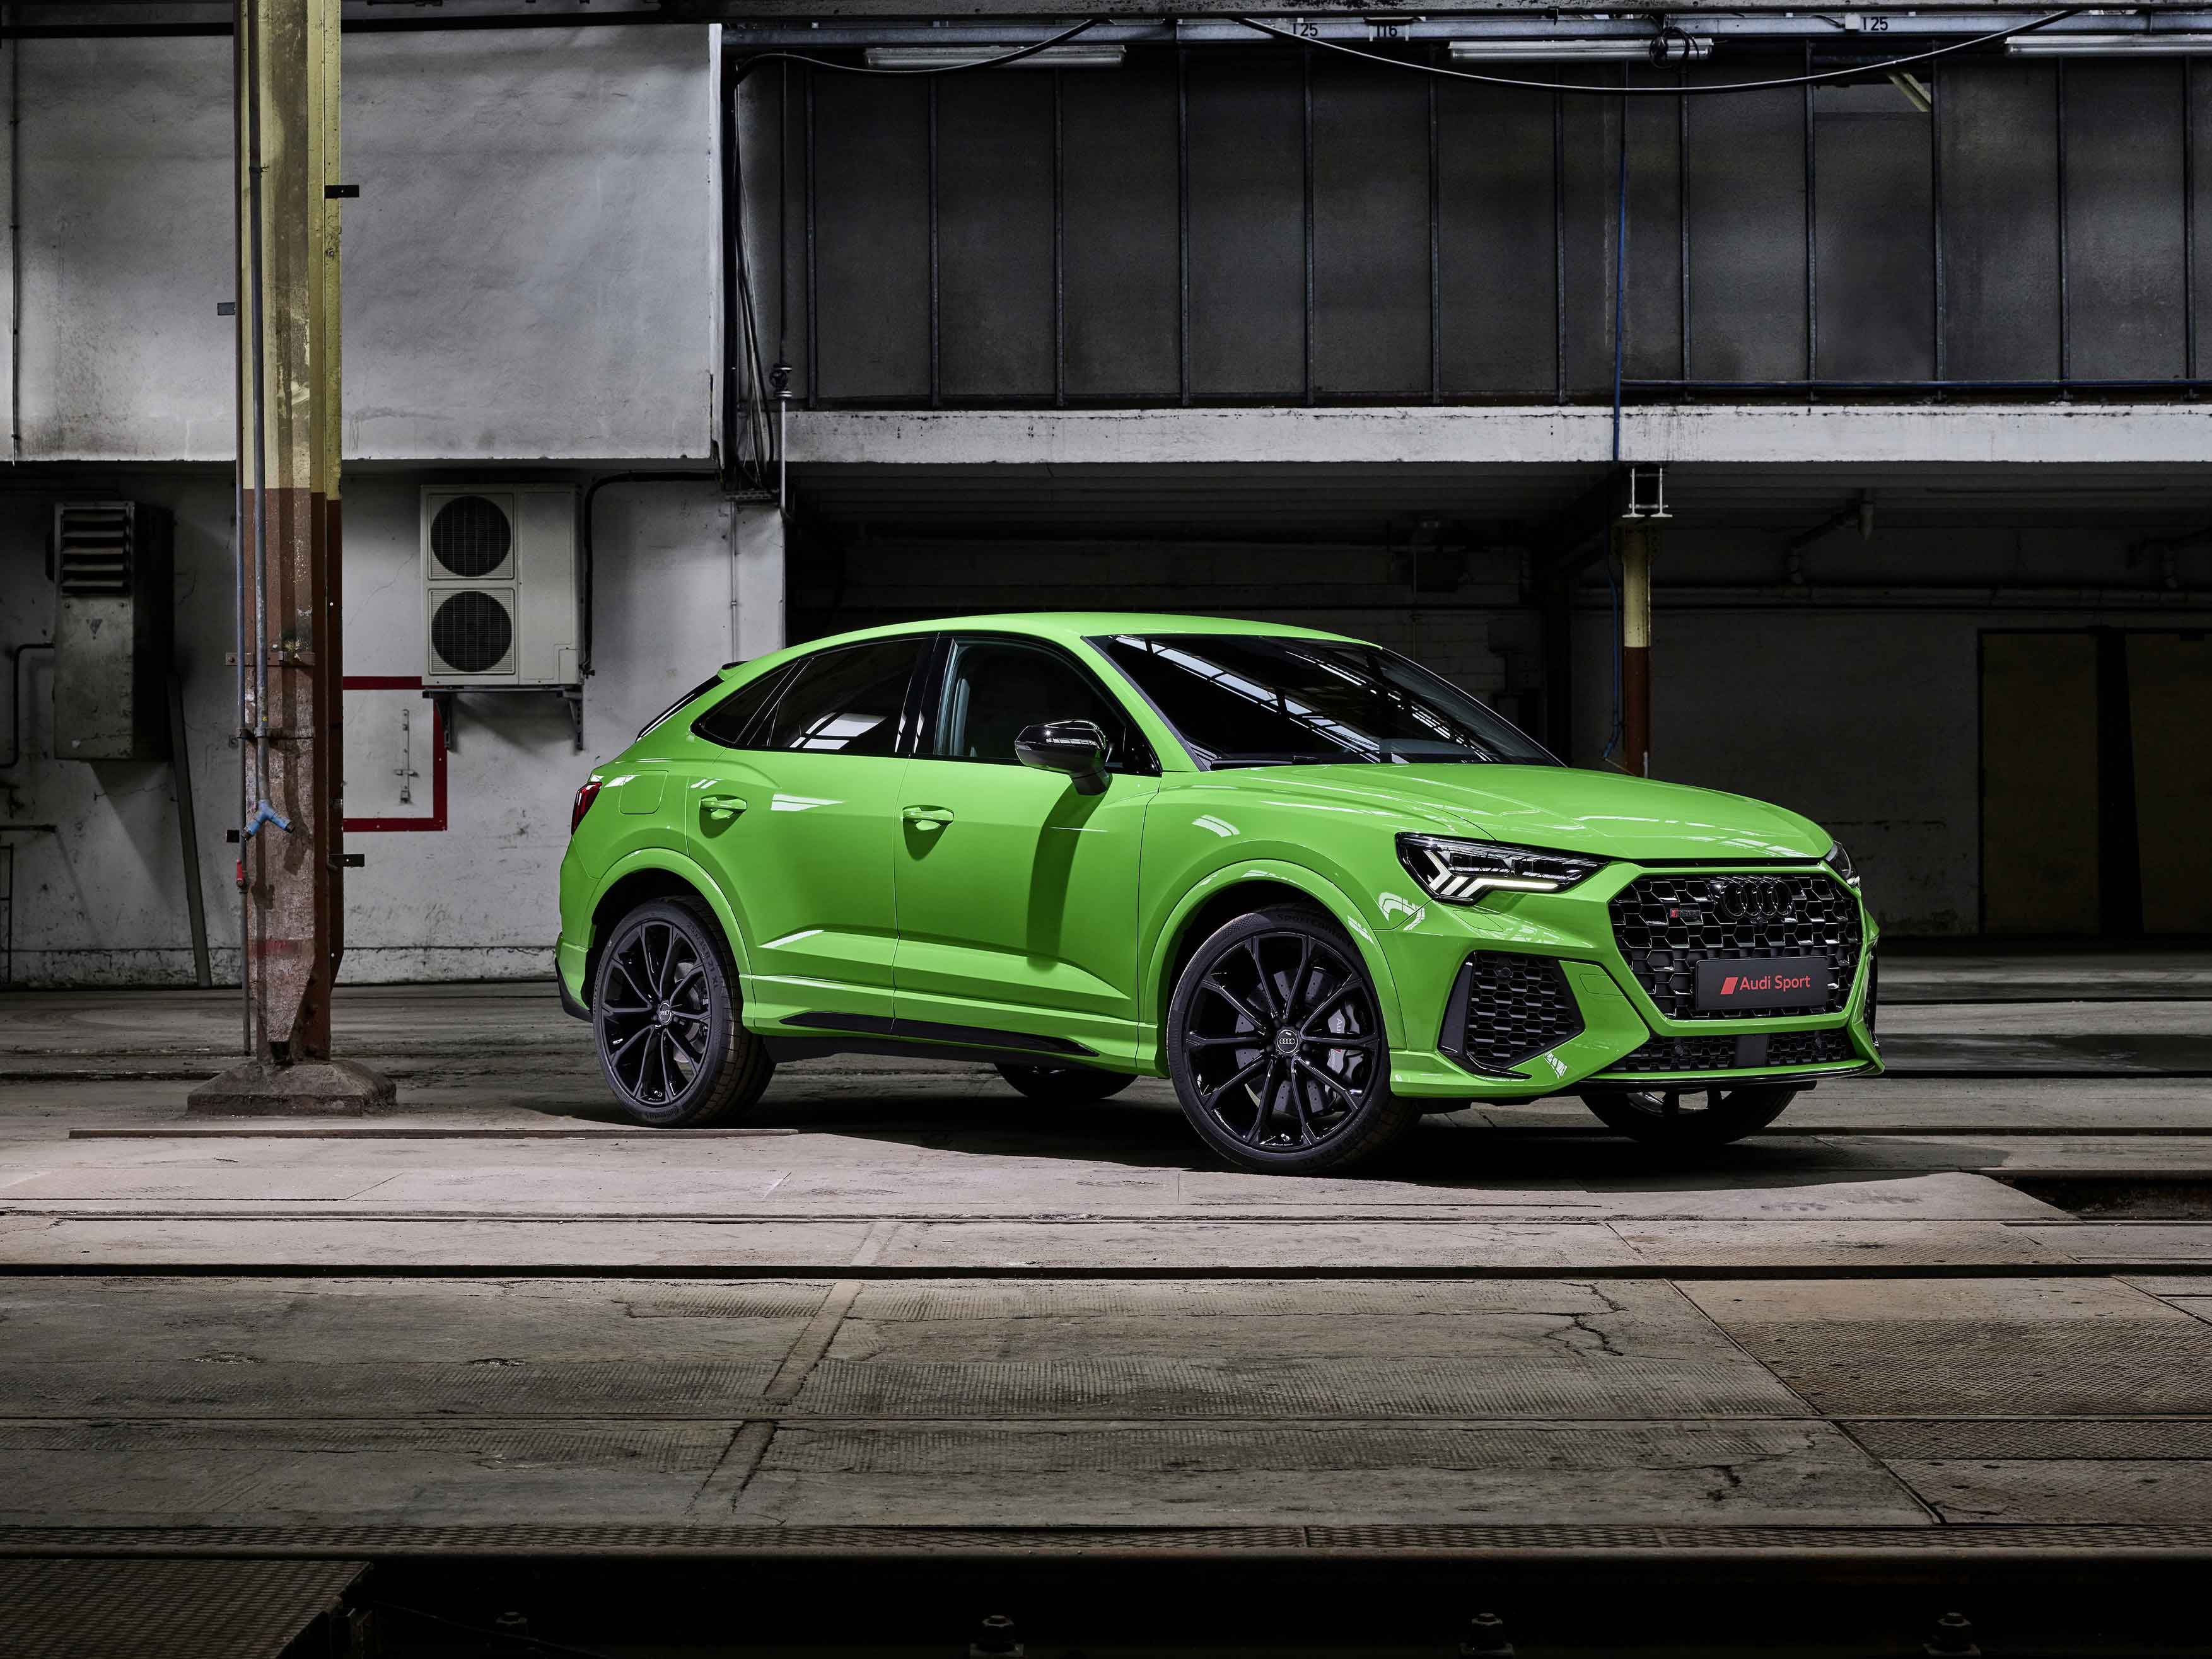 The new Audi RS Q3 Sportback makes its debut in Dubai and Northern Emirates & Parts News